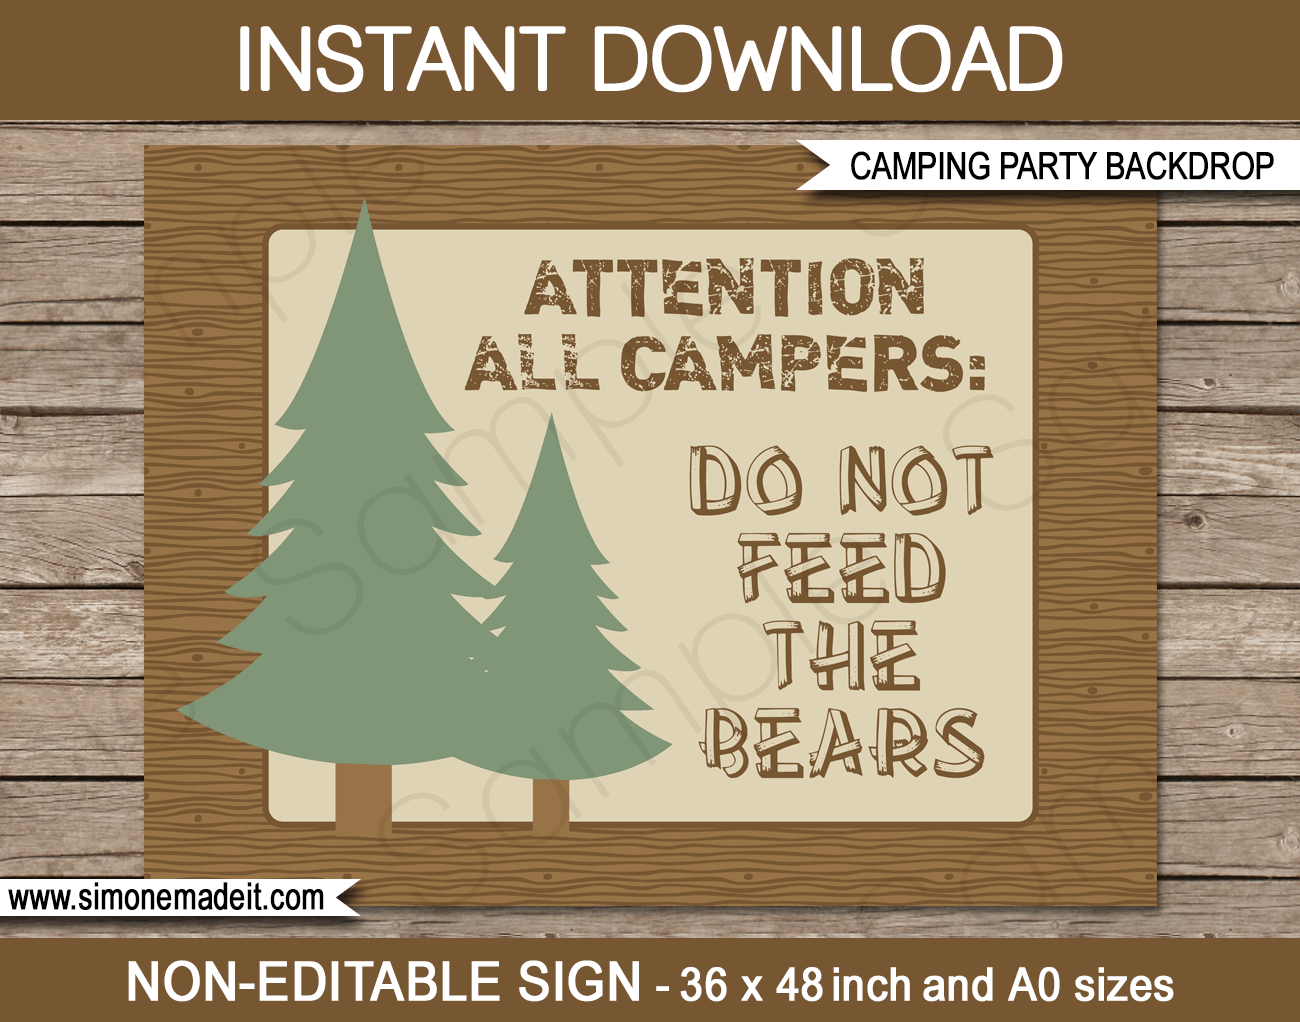 Camping Party Sign Backdrop - Do not Feed the Bears | Printable DIY Template | Party Decorations | 36x48 inches | A0 | $4.50 Instant Download via SIMONEmadeit.com